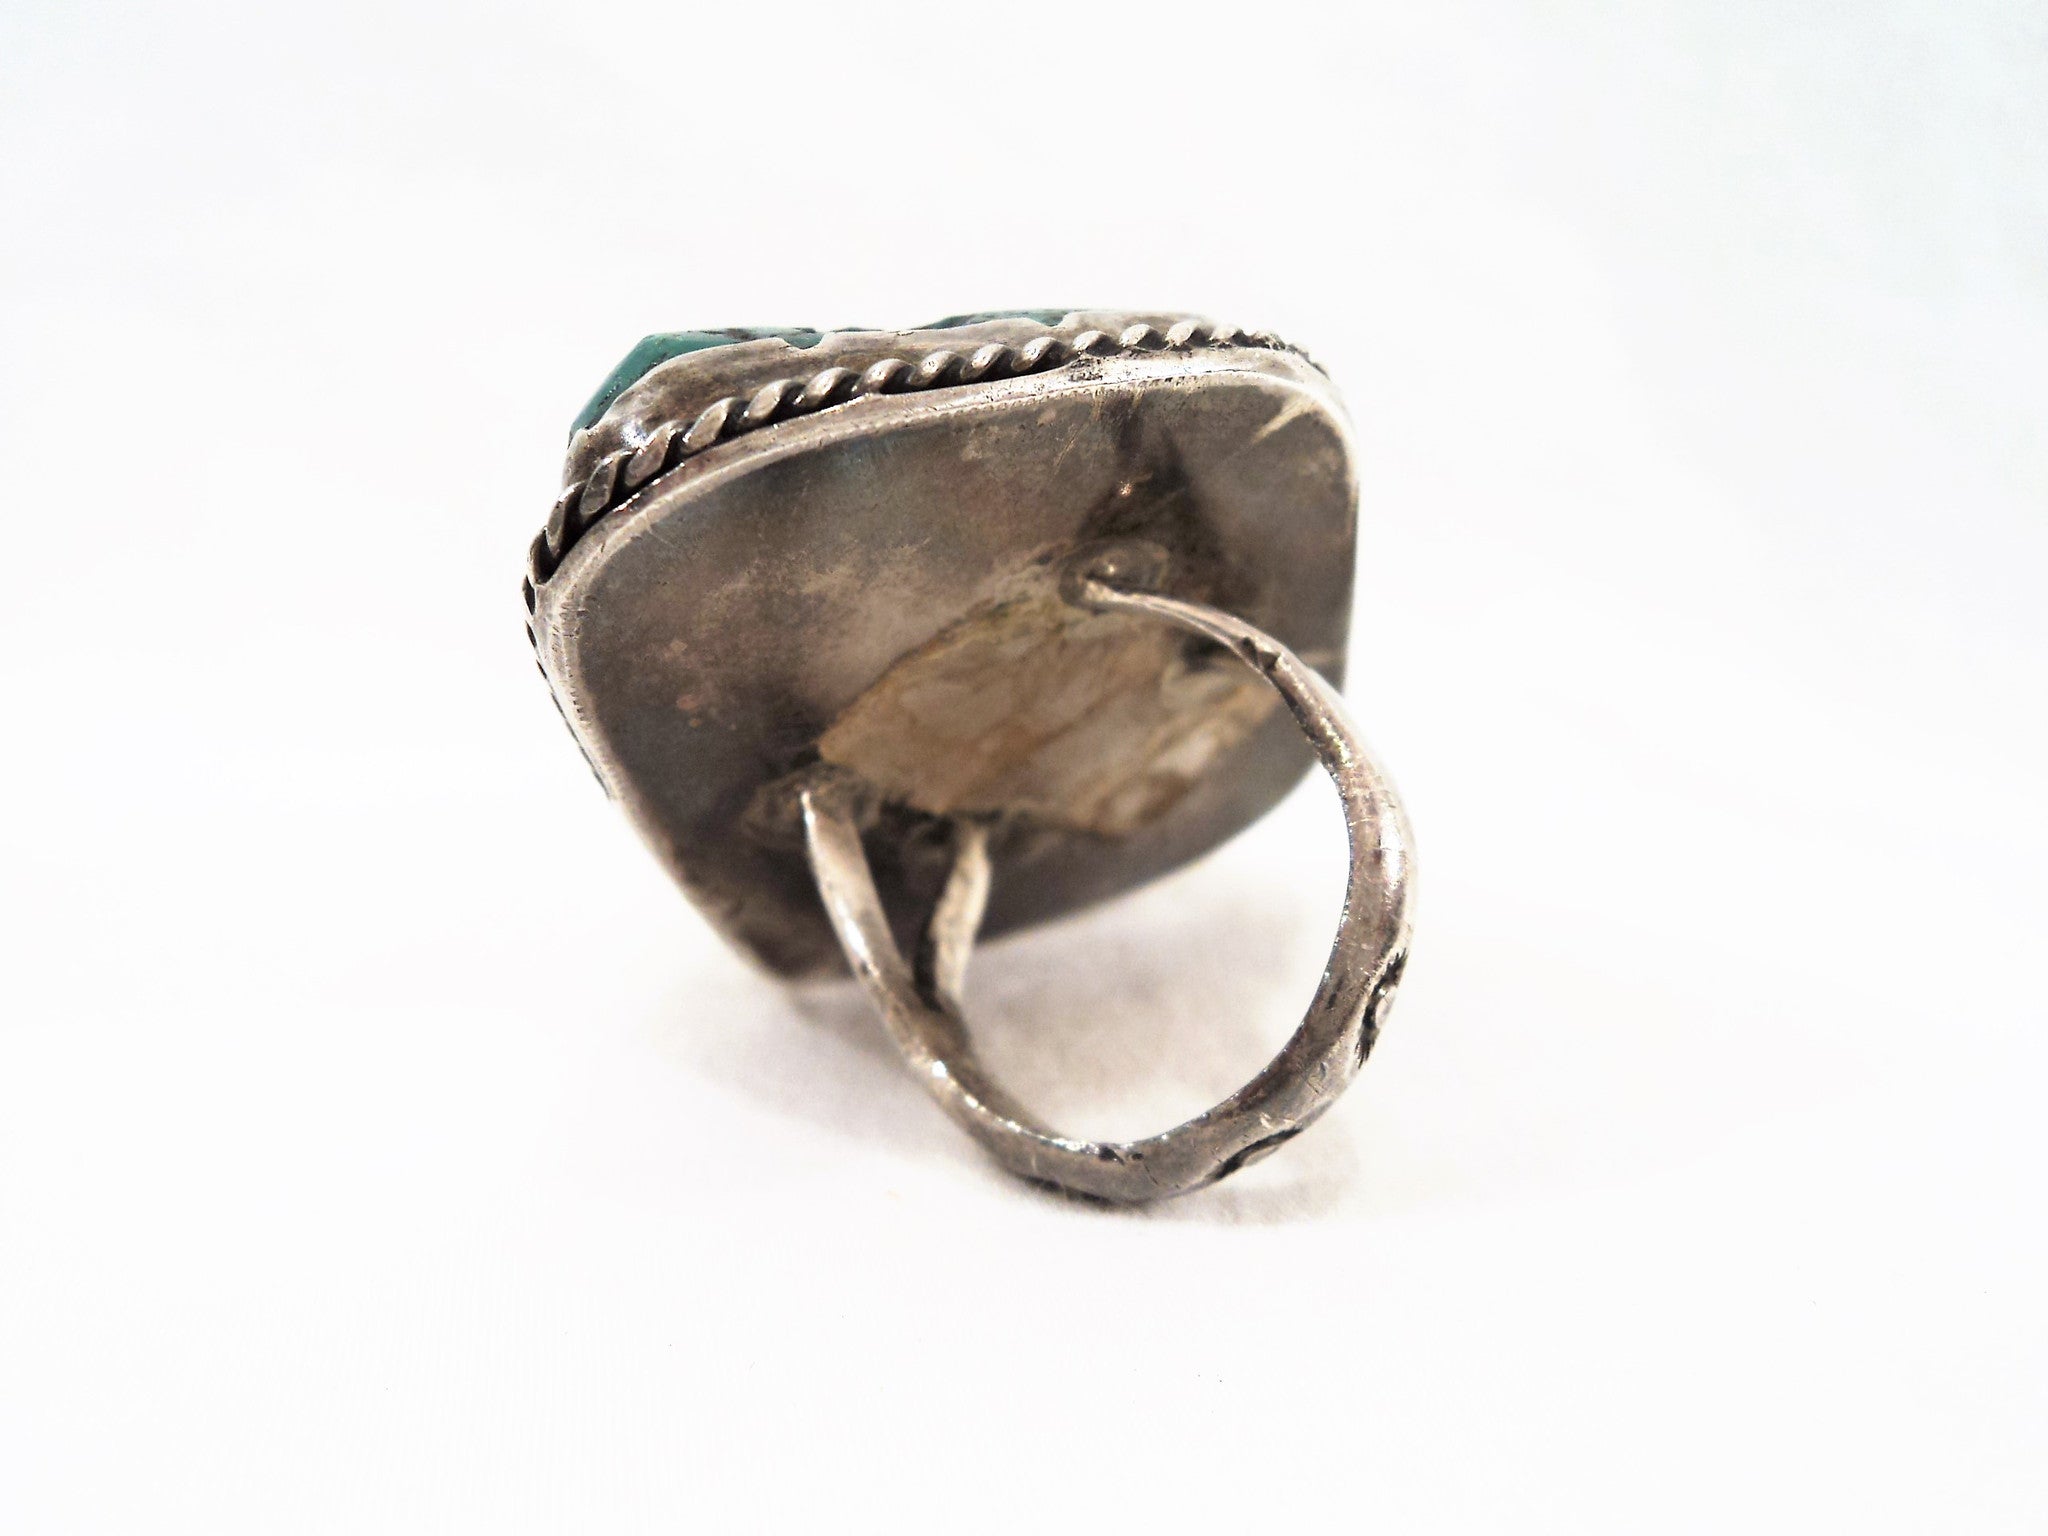 Vintage Native American Silver Turquoise Ring